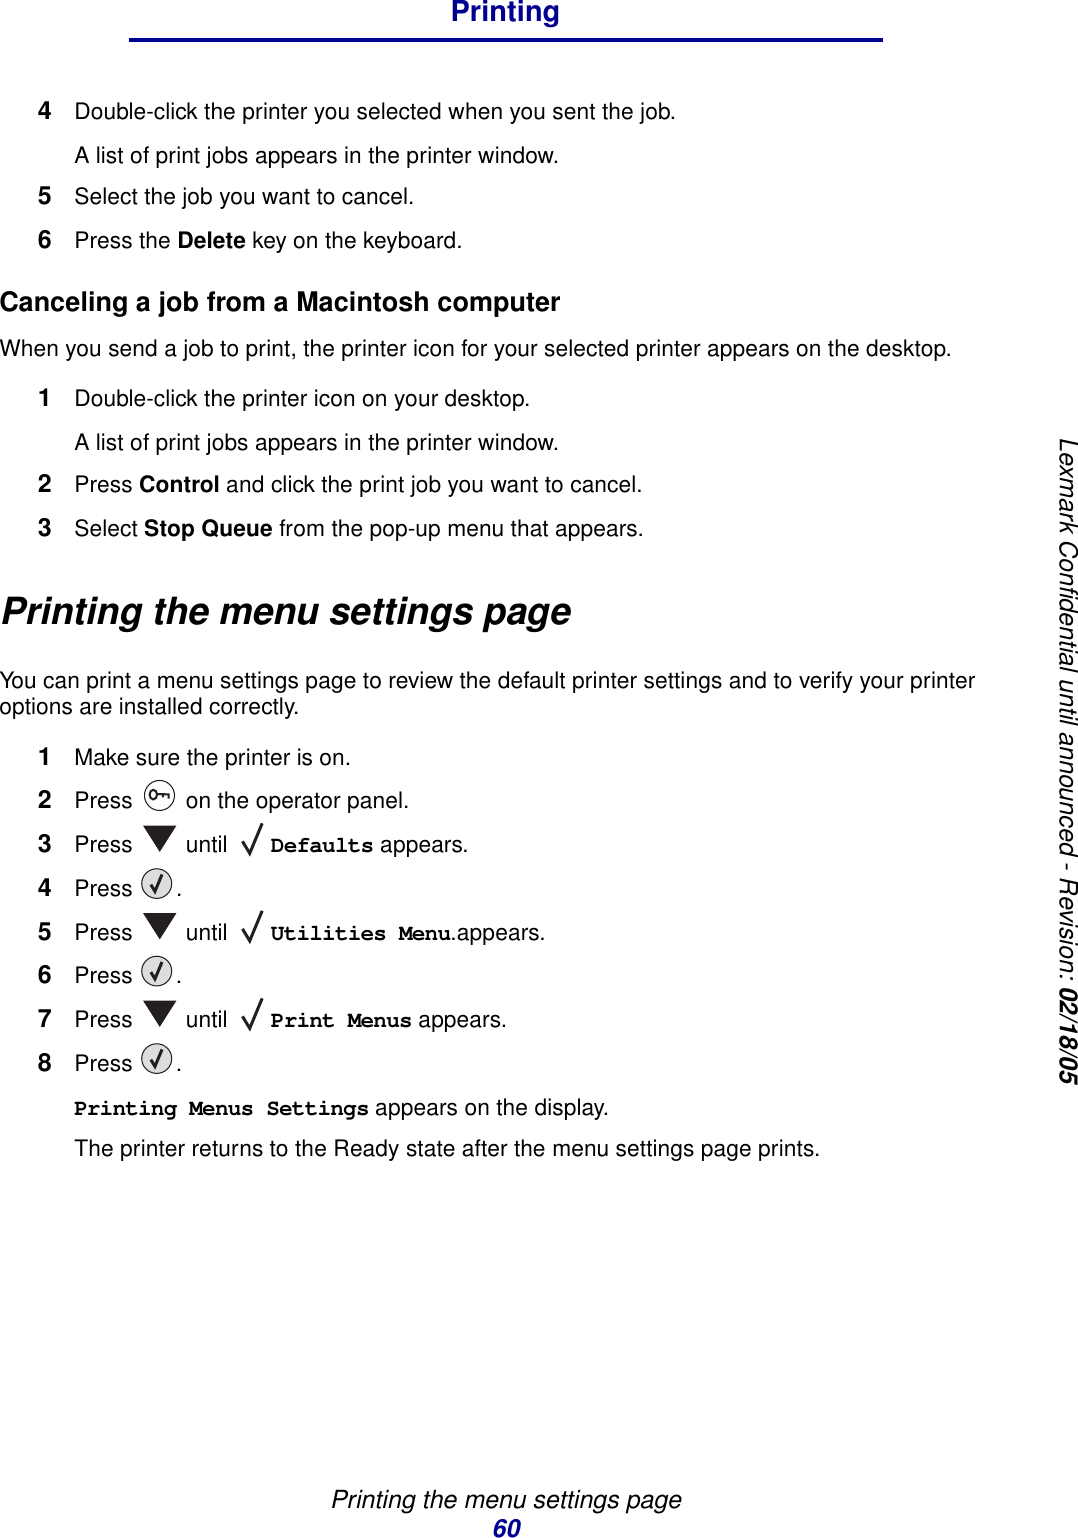 Printing the menu settings page60PrintingLexmark Confidential until announced - Revision: 02/18/054Double-click the printer you selected when you sent the job.A list of print jobs appears in the printer window.5Select the job you want to cancel.6Press the Delete key on the keyboard.Canceling a job from a Macintosh computerWhen you send a job to print, the printer icon for your selected printer appears on the desktop.1Double-click the printer icon on your desktop.A list of print jobs appears in the printer window.2Press Control and click the print job you want to cancel.3Select Stop Queue from the pop-up menu that appears.Printing the menu settings pageYou can print a menu settings page to review the default printer settings and to verify your printer options are installed correctly.1Make sure the printer is on.2Press   on the operator panel.3Press  until Defaults appears.4Press .5Press  until Utilities Menu.appears.6Press .7Press  until Print Menus appears.8Press .Printing Menus Settings appears on the display.The printer returns to the Ready state after the menu settings page prints.